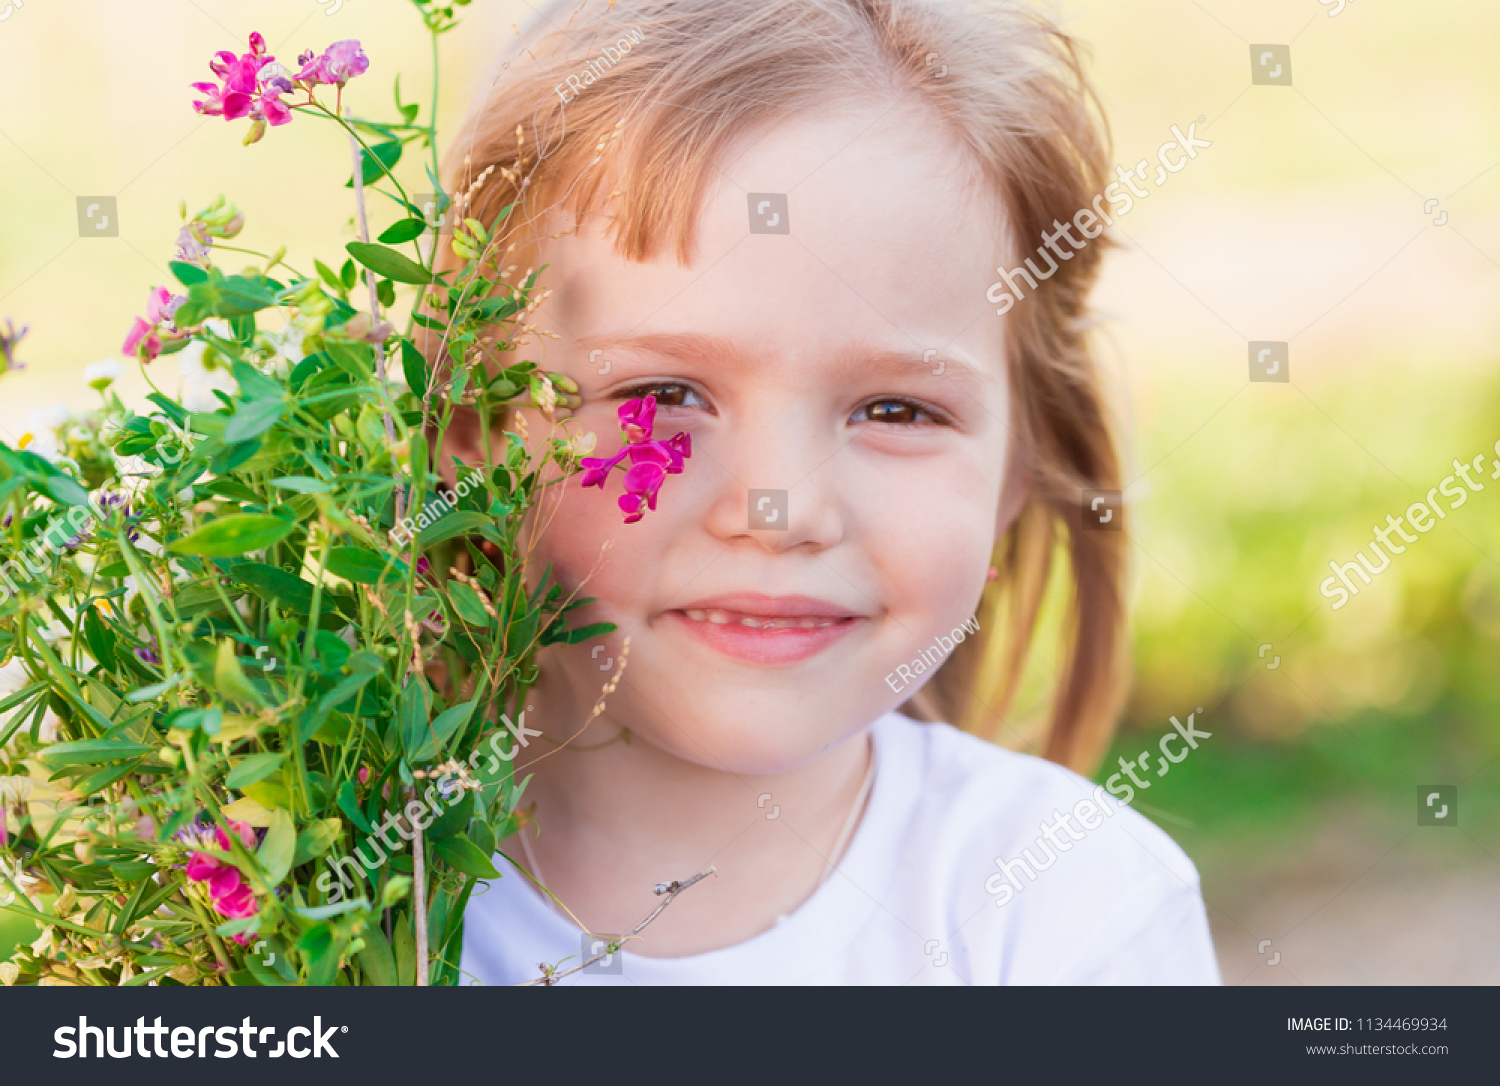 3. Blonde Hair Girl High Res Stock Images - wide 8